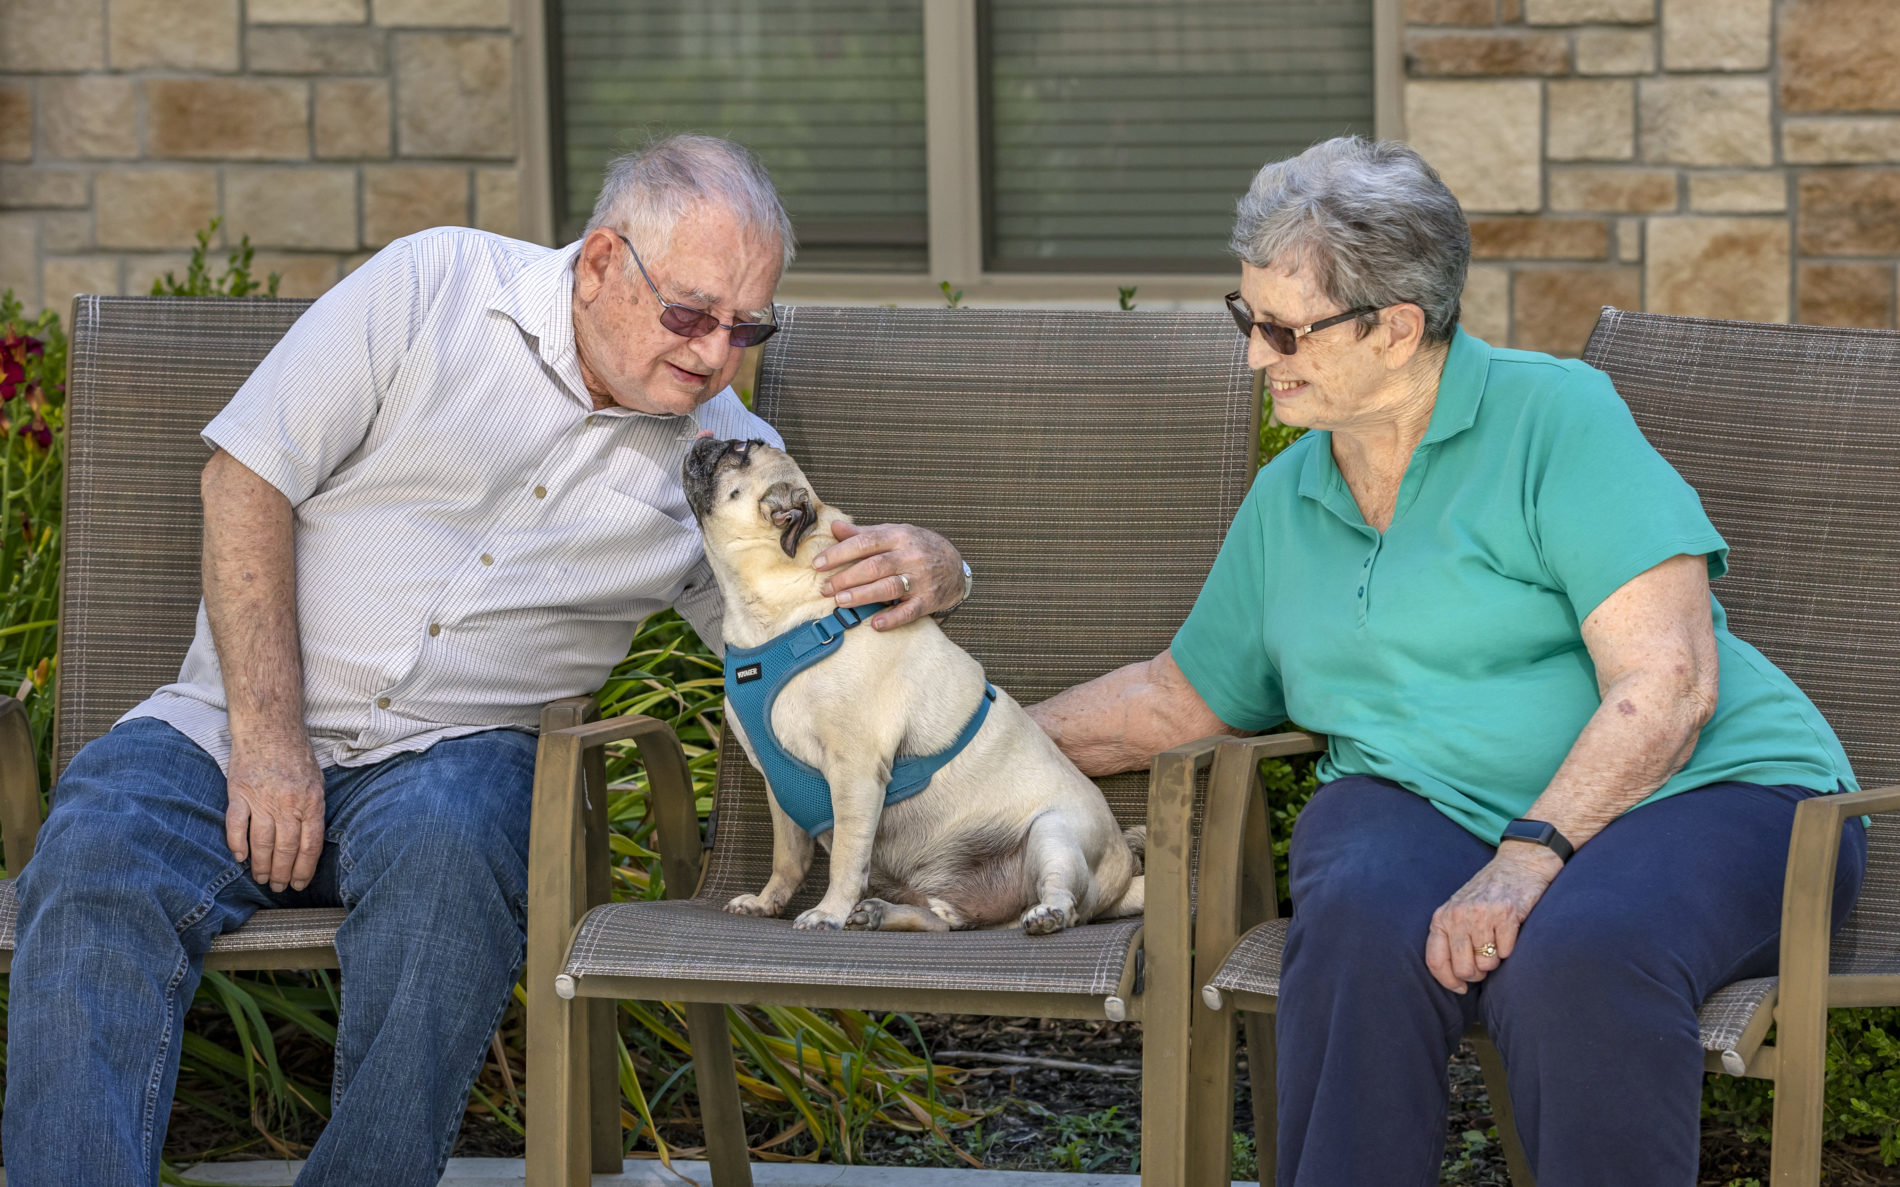 Elderly couple sitting in chairs with dog